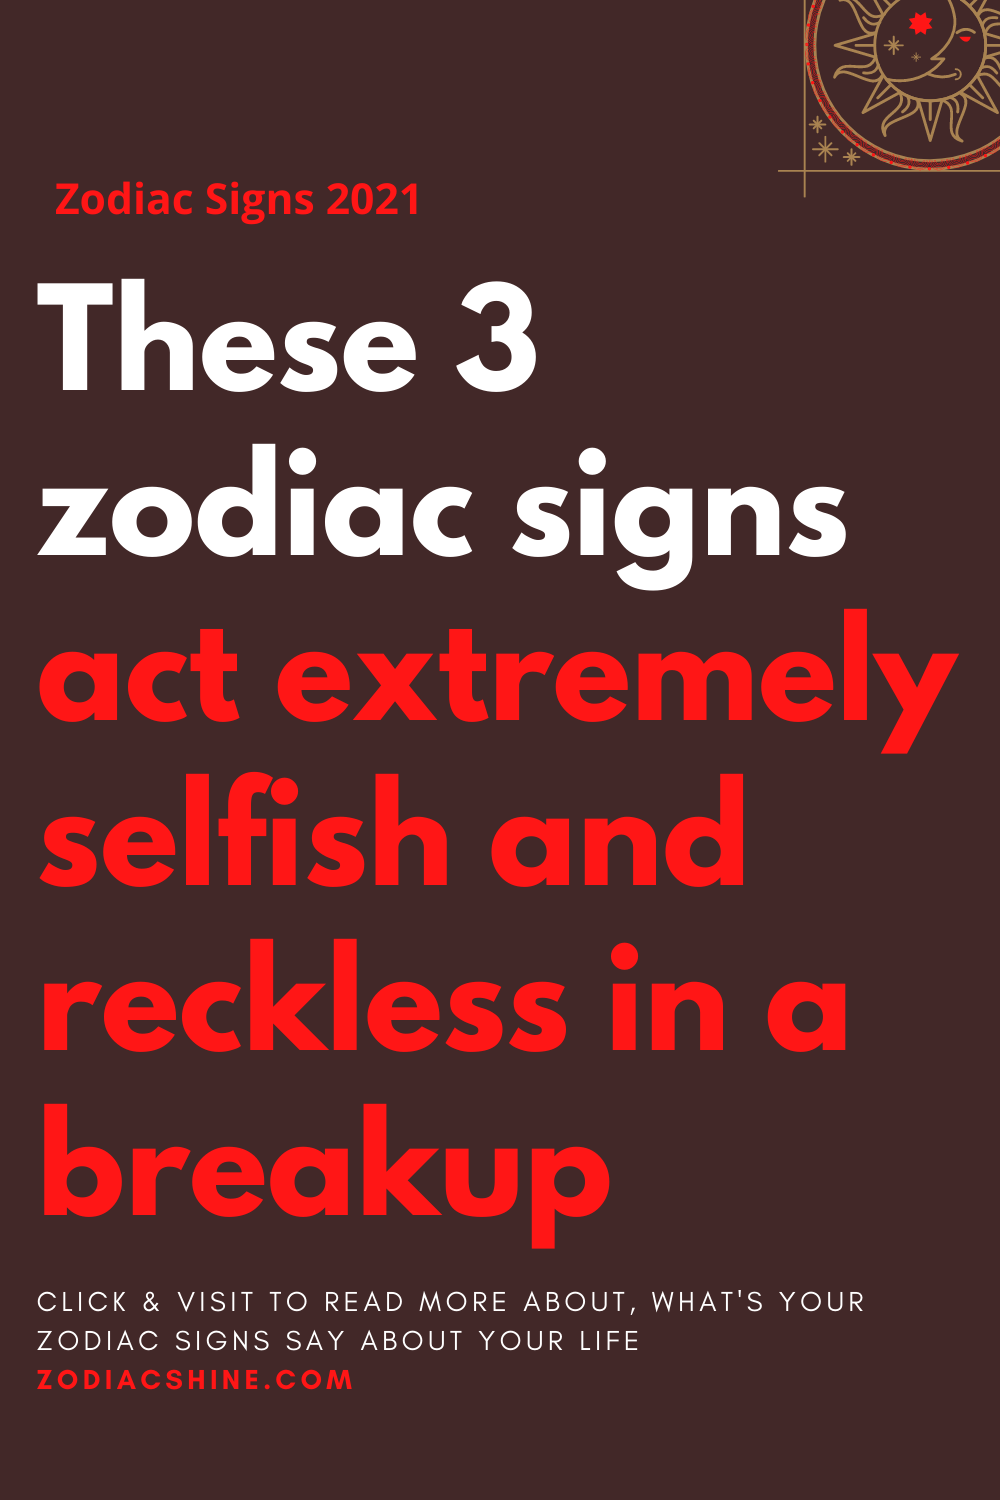 These 3 zodiac signs act extremely selfish and reckless in a breakup